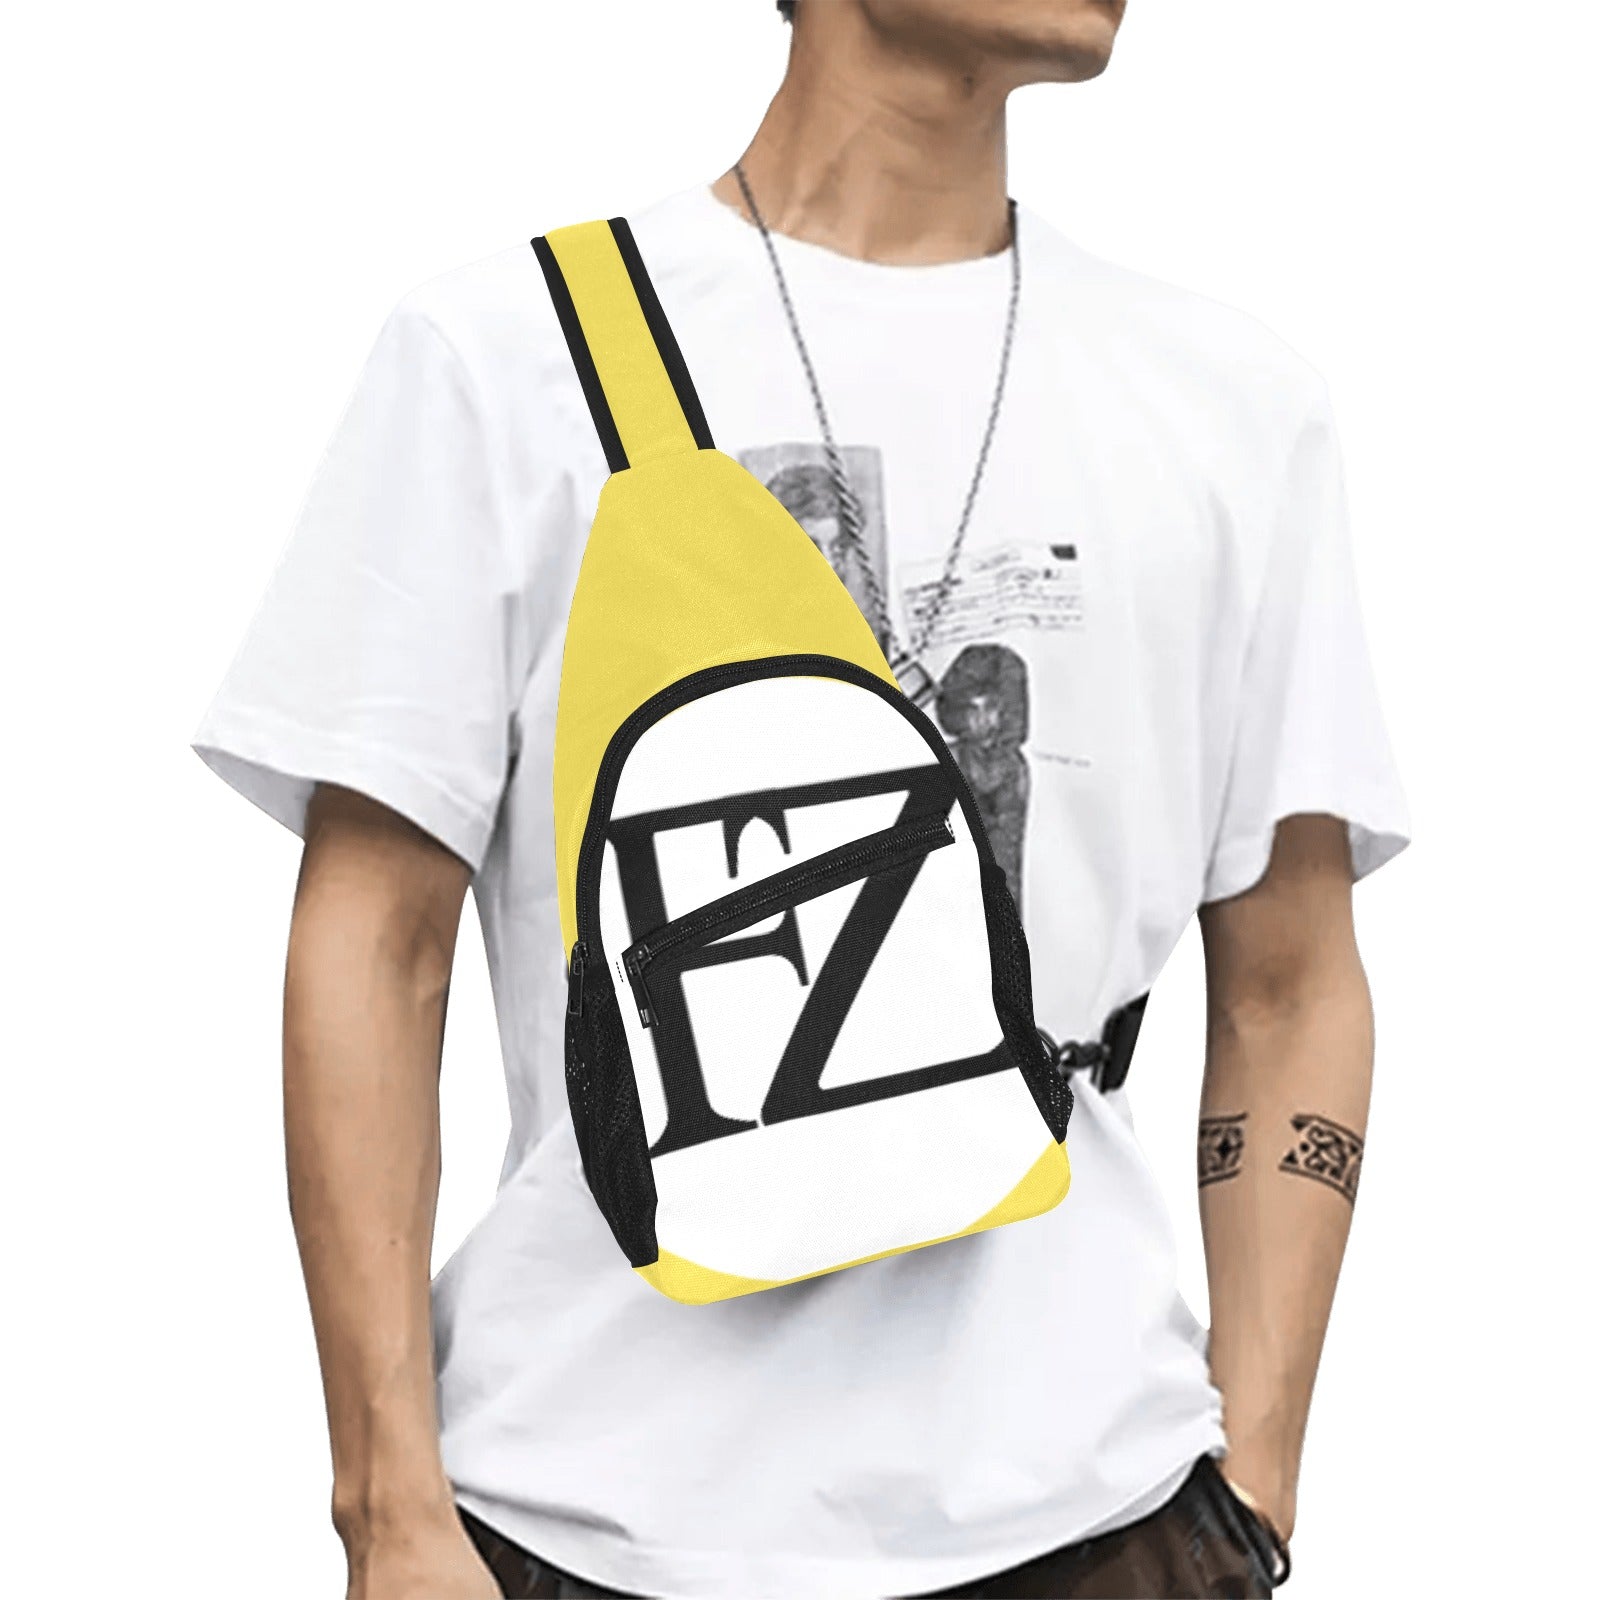 fz men's chest bag too one size / fz men's chest bag  - yellow all over print chest bag(model1719)